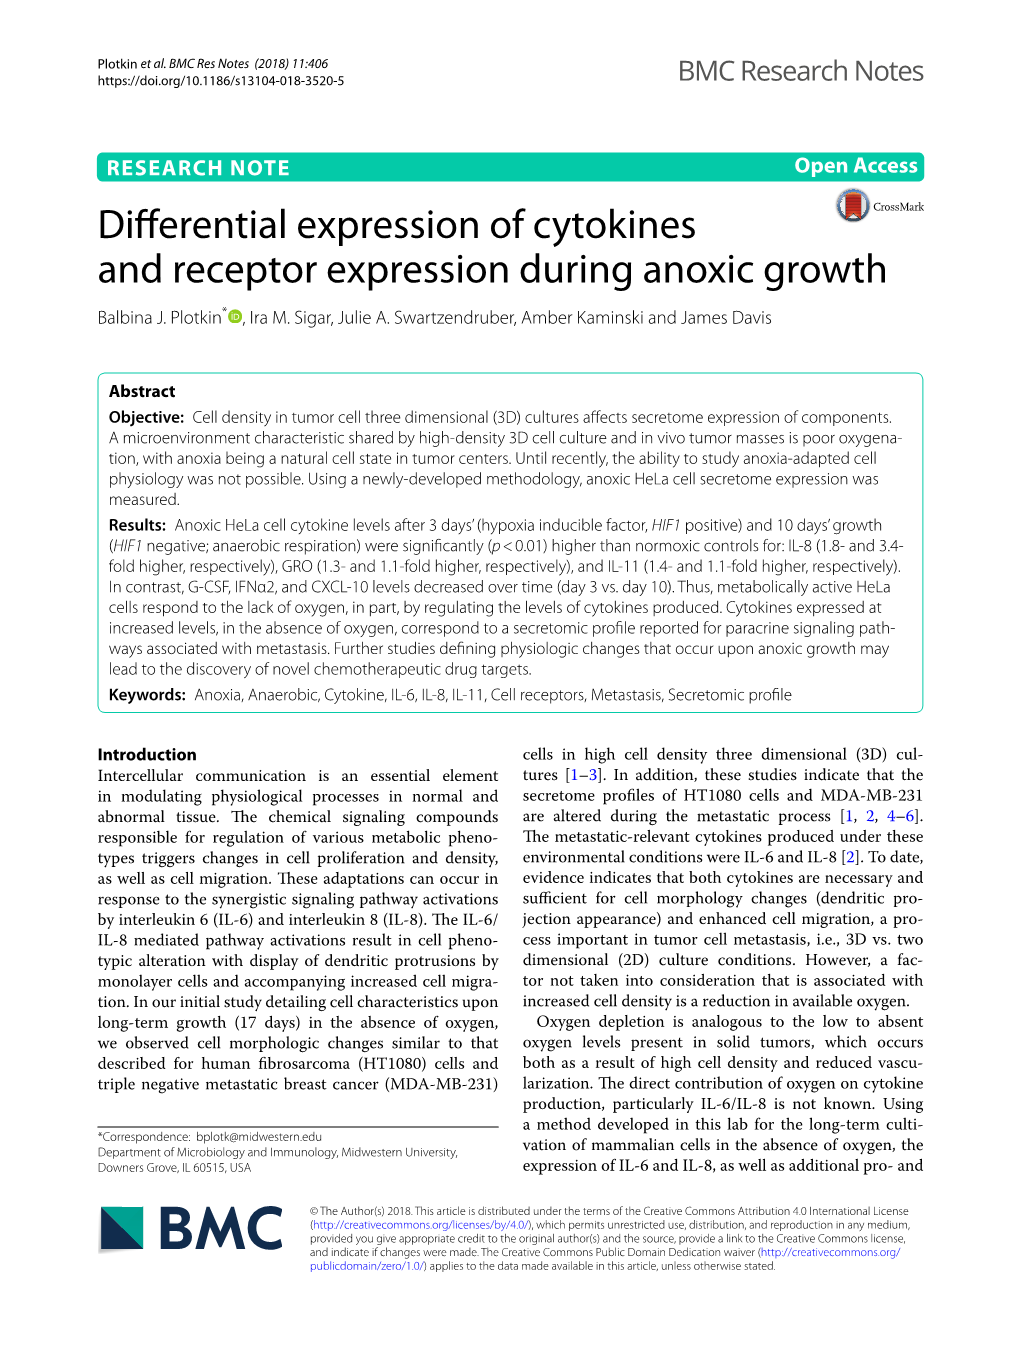 Differential Expression of Cytokines and Receptor Expression During